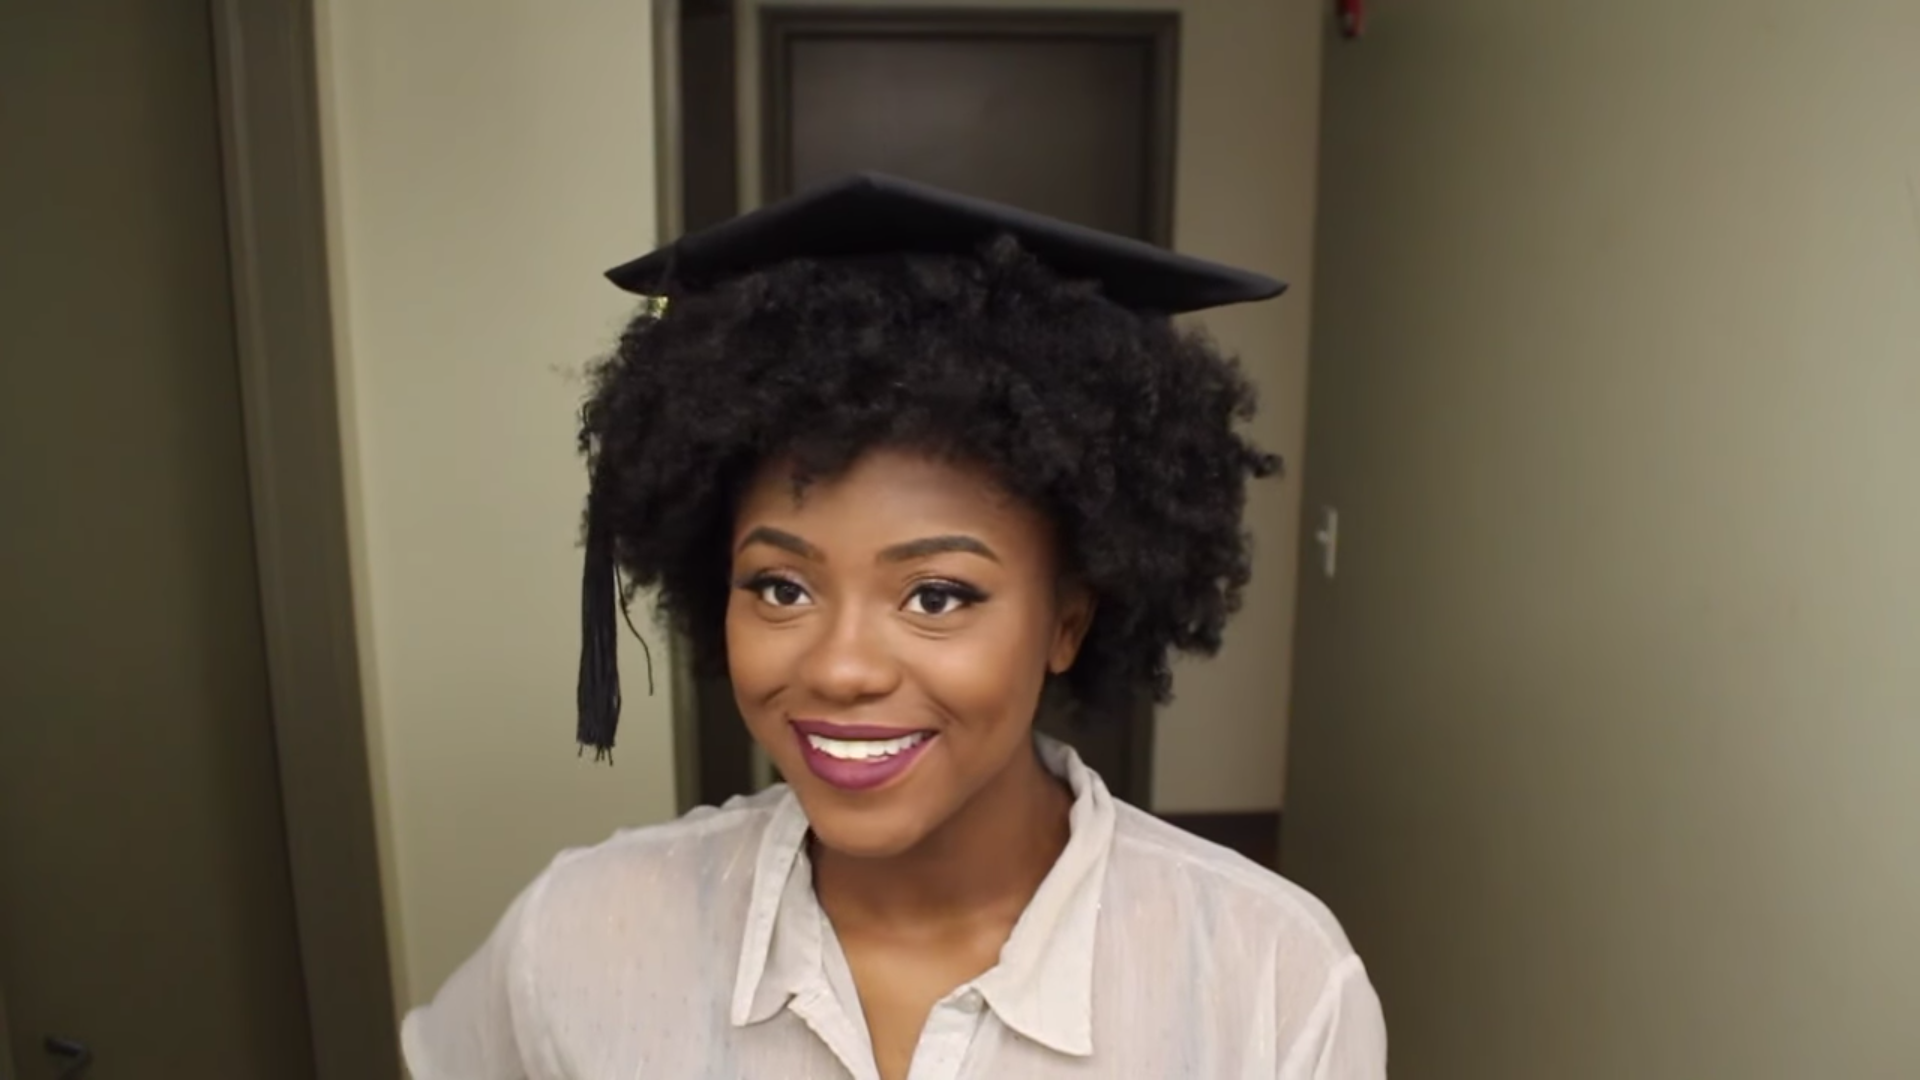 How To Make A Graduation Cap Fit On Kinky Or Curly Hair